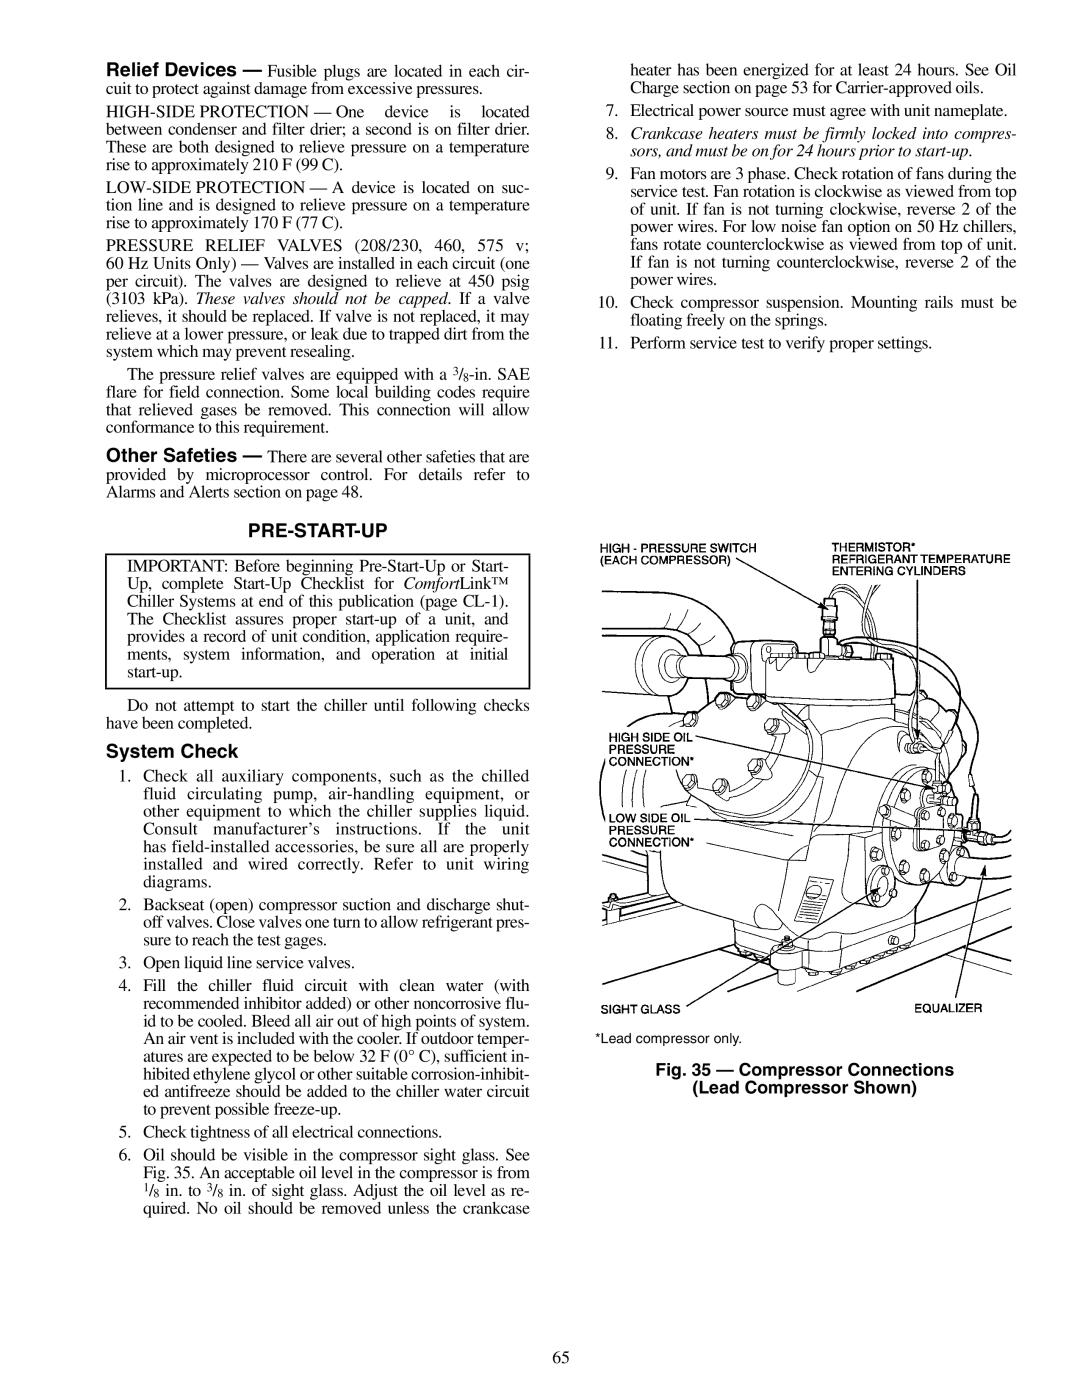 Carrier Air Conditioner specifications Pre-Start-Up, System Check, Compressor Connections Lead Compressor Shown 